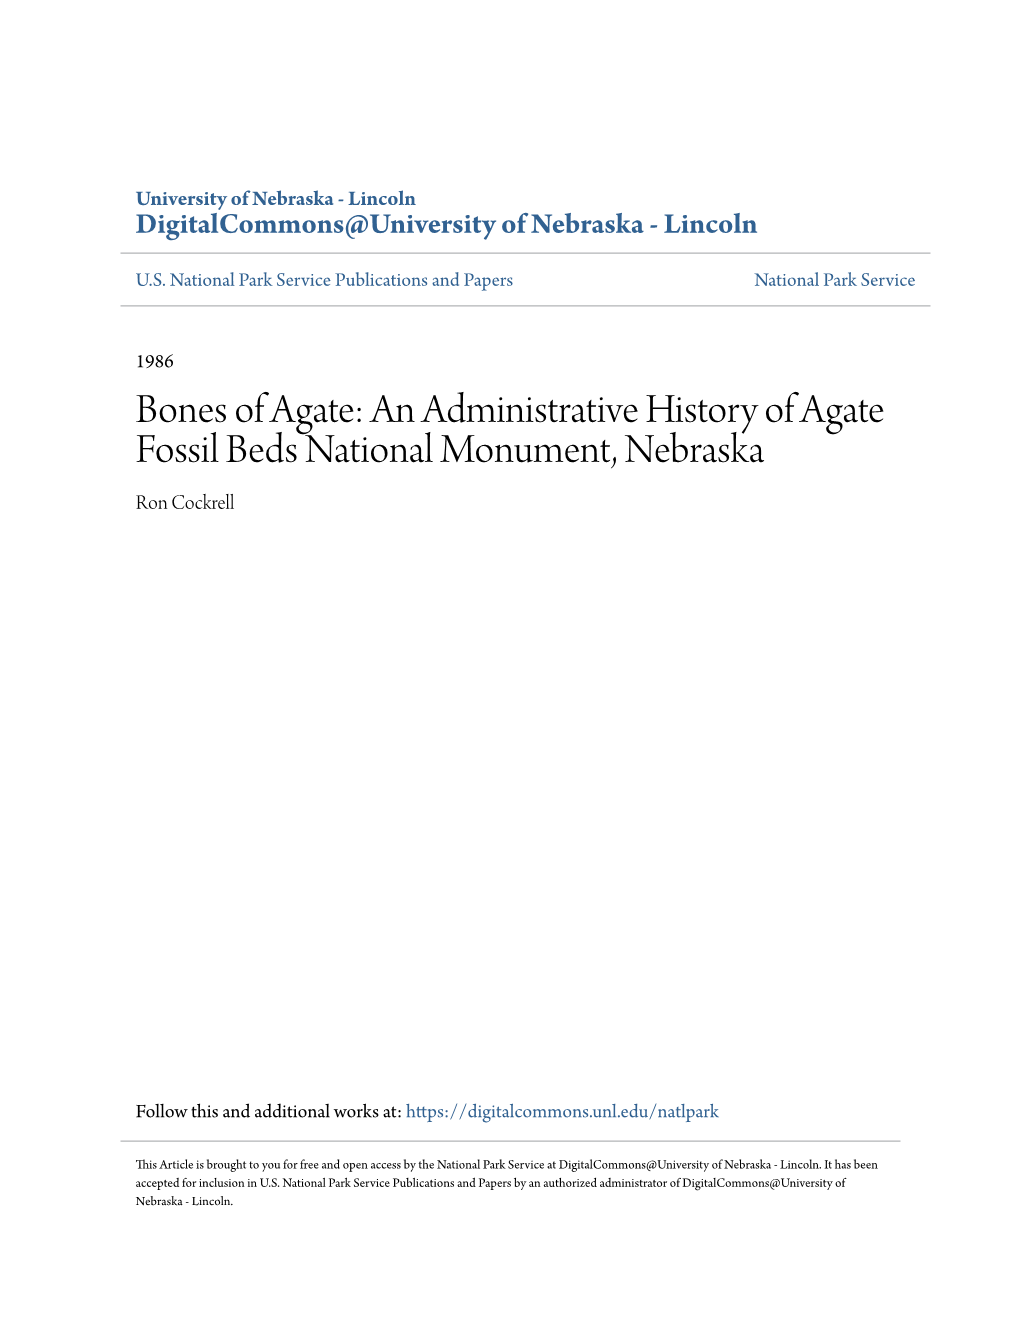 An Administrative History of Agate Fossil Beds National Monument, Nebraska Ron Cockrell